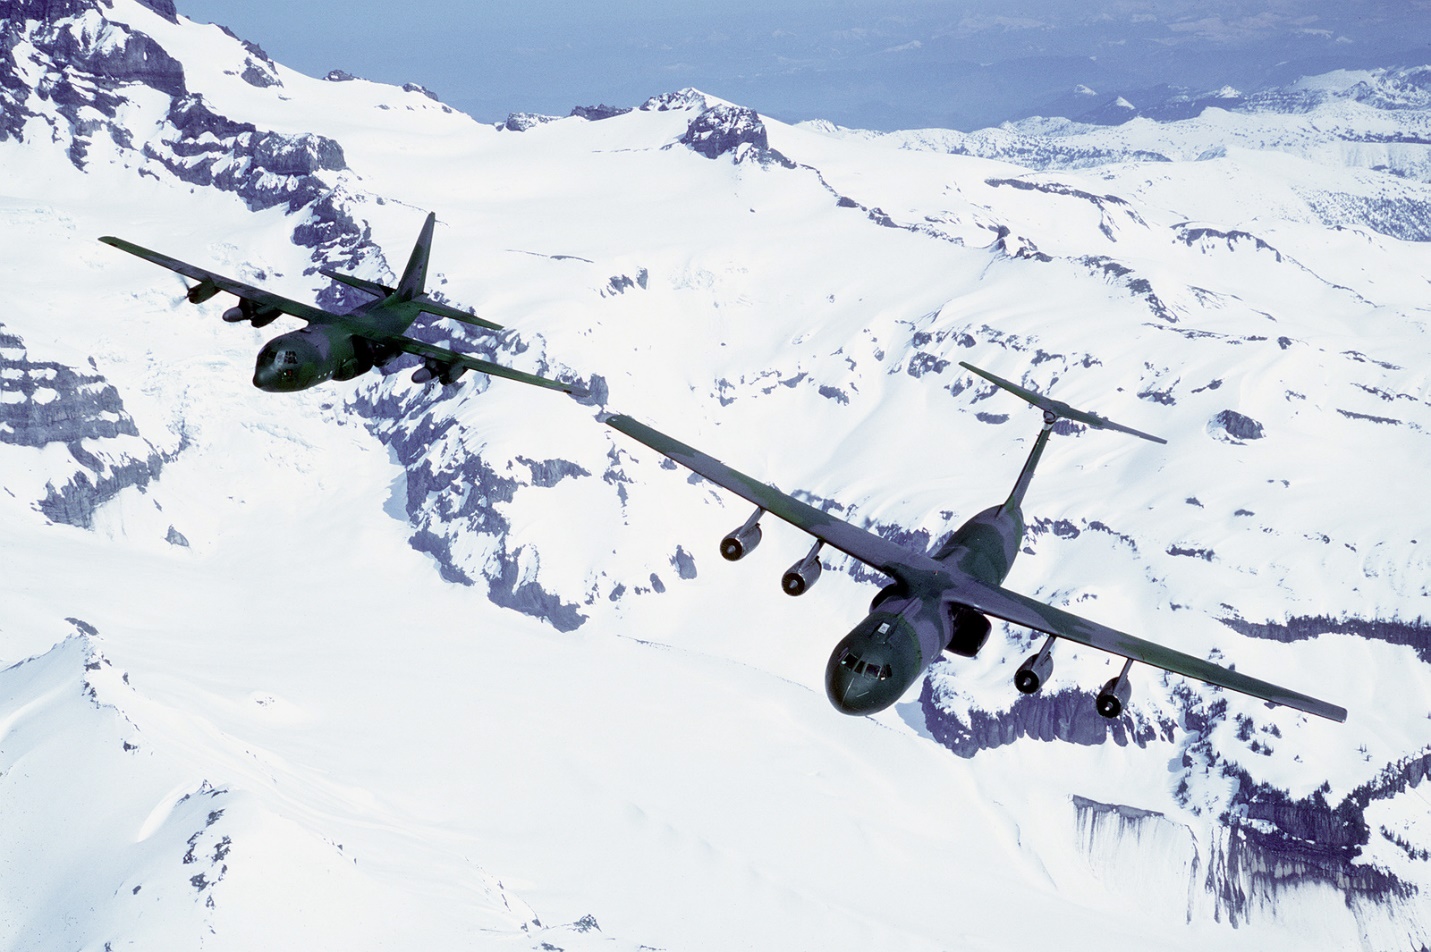 An air-to-air front view of a C-141 Starlifter aircraft (right) from the 62nd Military Airlift Squadron, and a C-130 Hercules aircraft above snow covered mountains - U.S. National Archives &amp; DVIDS Public